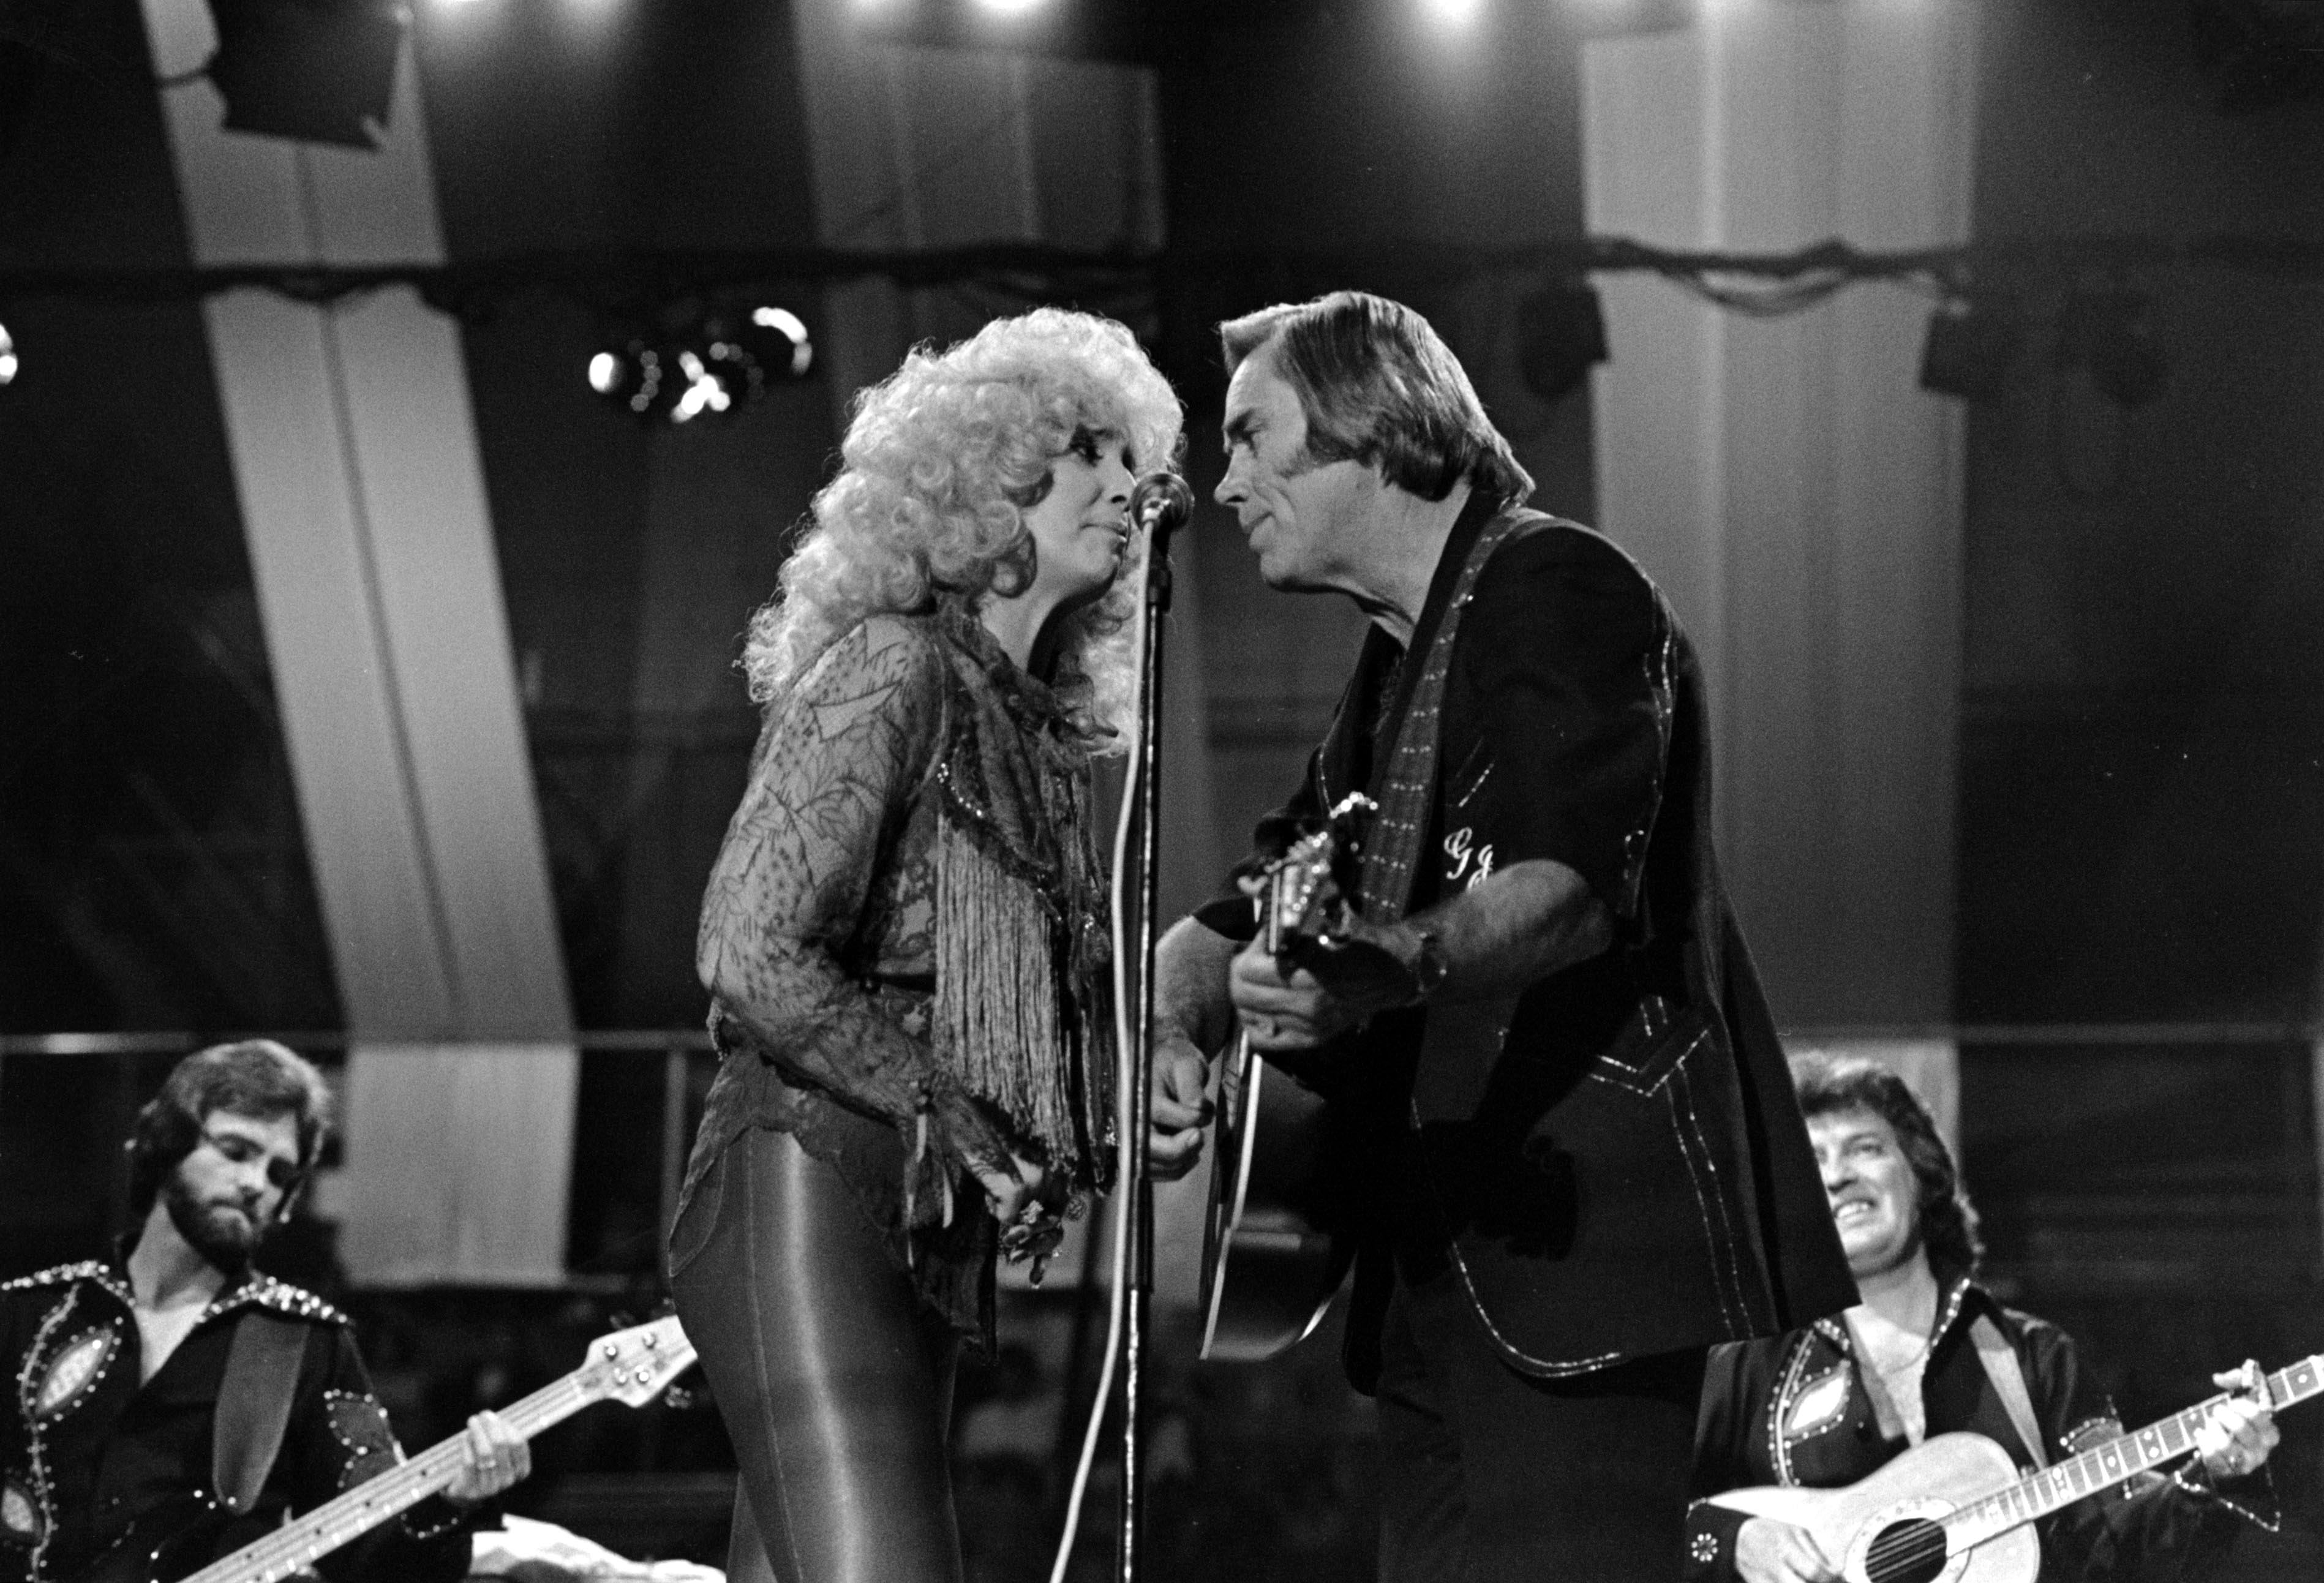 Tammy Wynette and George Jones perform at Wembley Arena